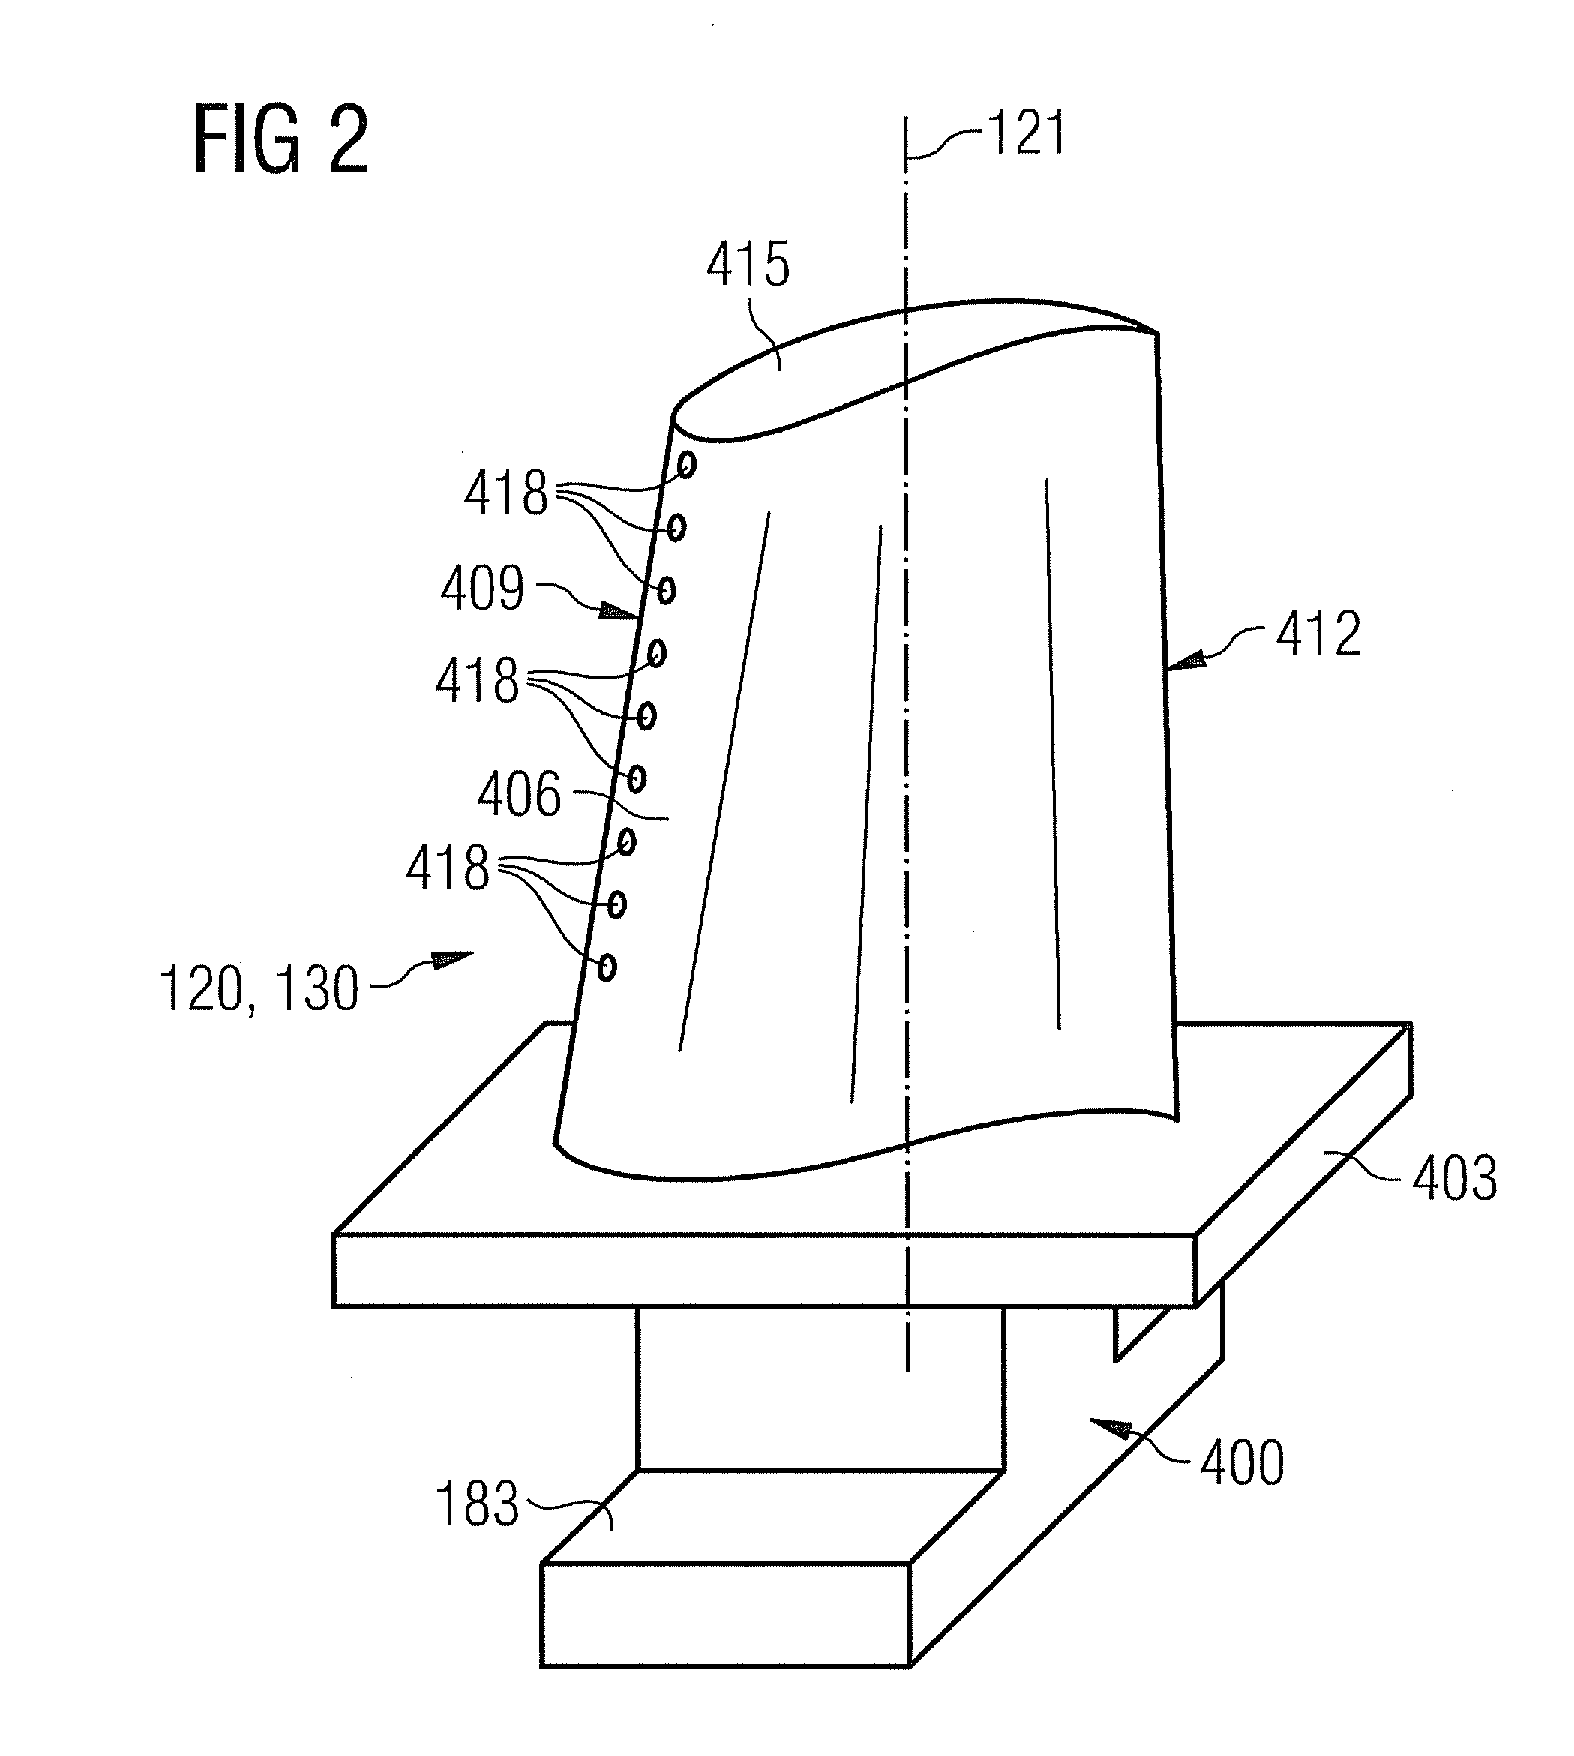 Method and Apparatus for Welding Workpieces of High-Temperature Superalloys